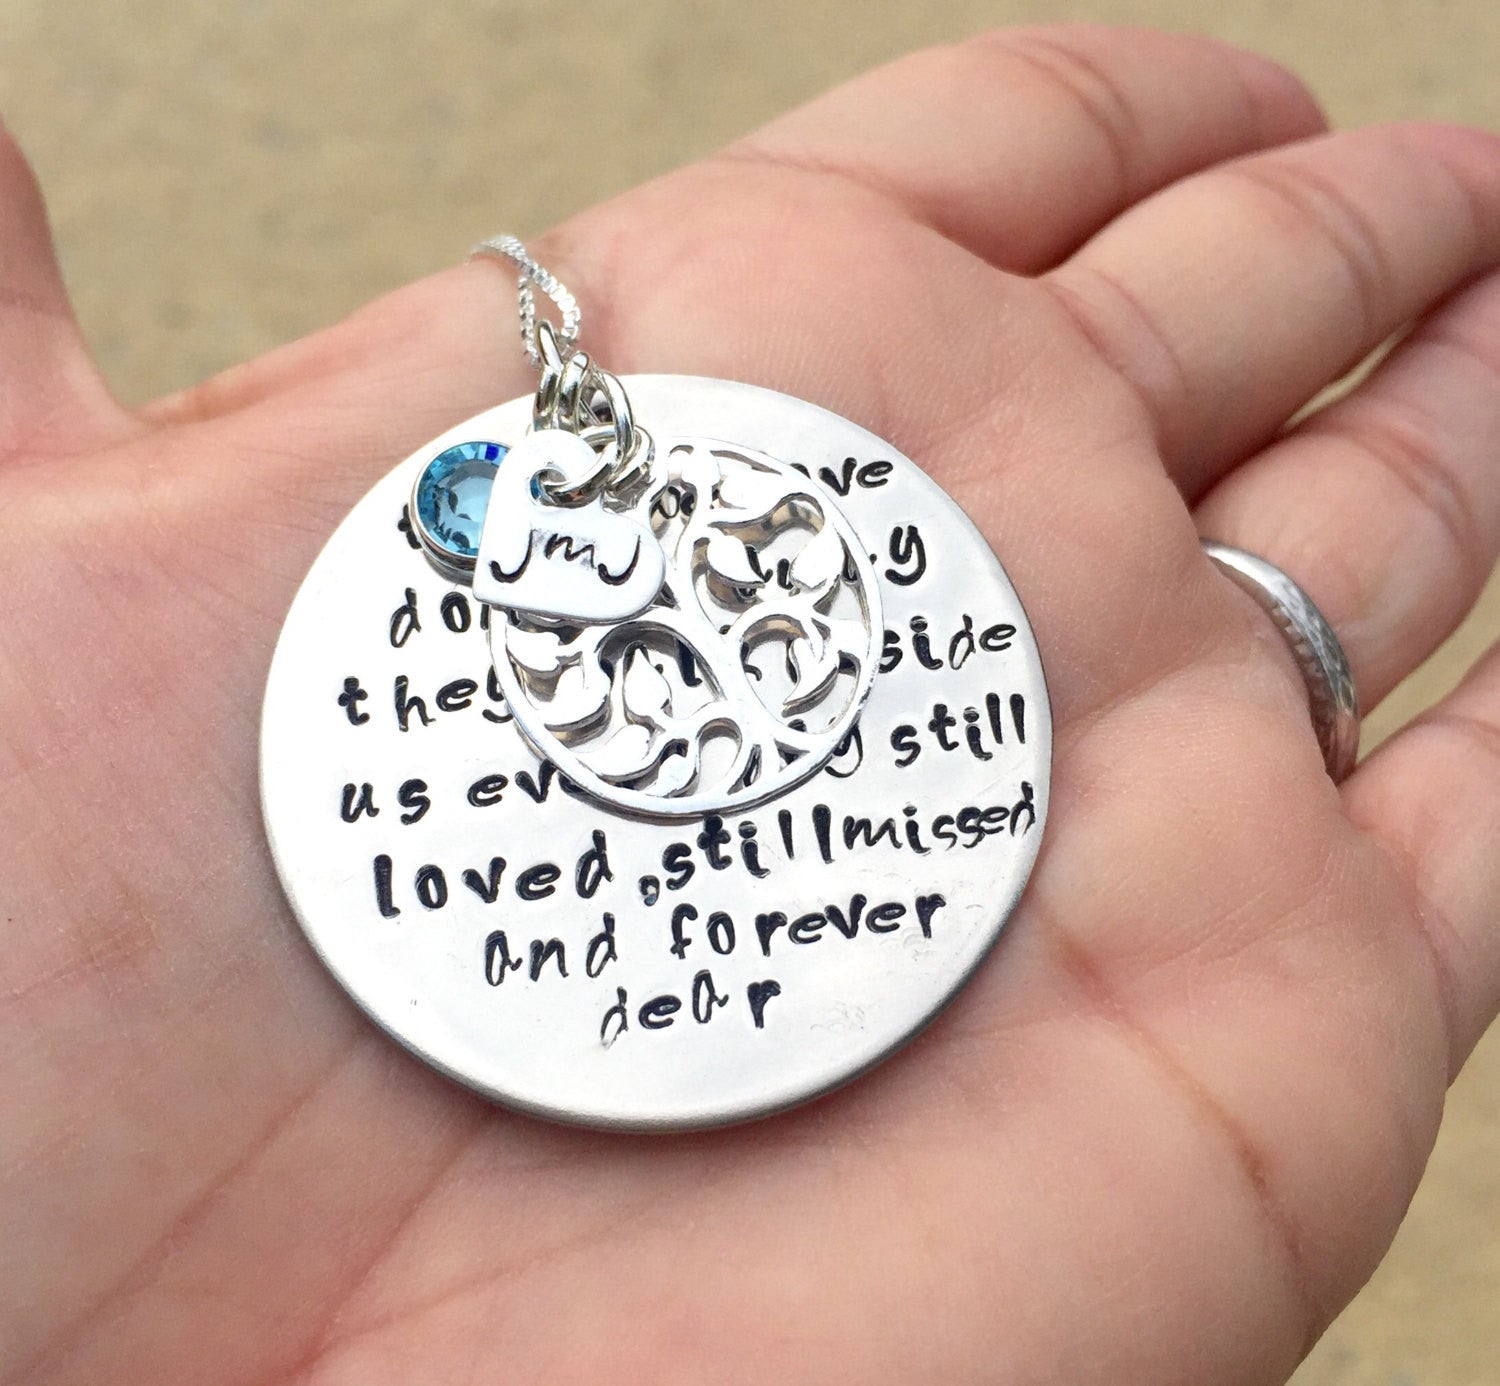 memorial necklace, rememberance necklace, natashaaloha, tree of life necklace, lyrics necklace, memorial quote necklace, hand stamped - Natashaaloha, jewelry, bracelets, necklace, keychains, fishing lures, gifts for men, charms, personalized, 